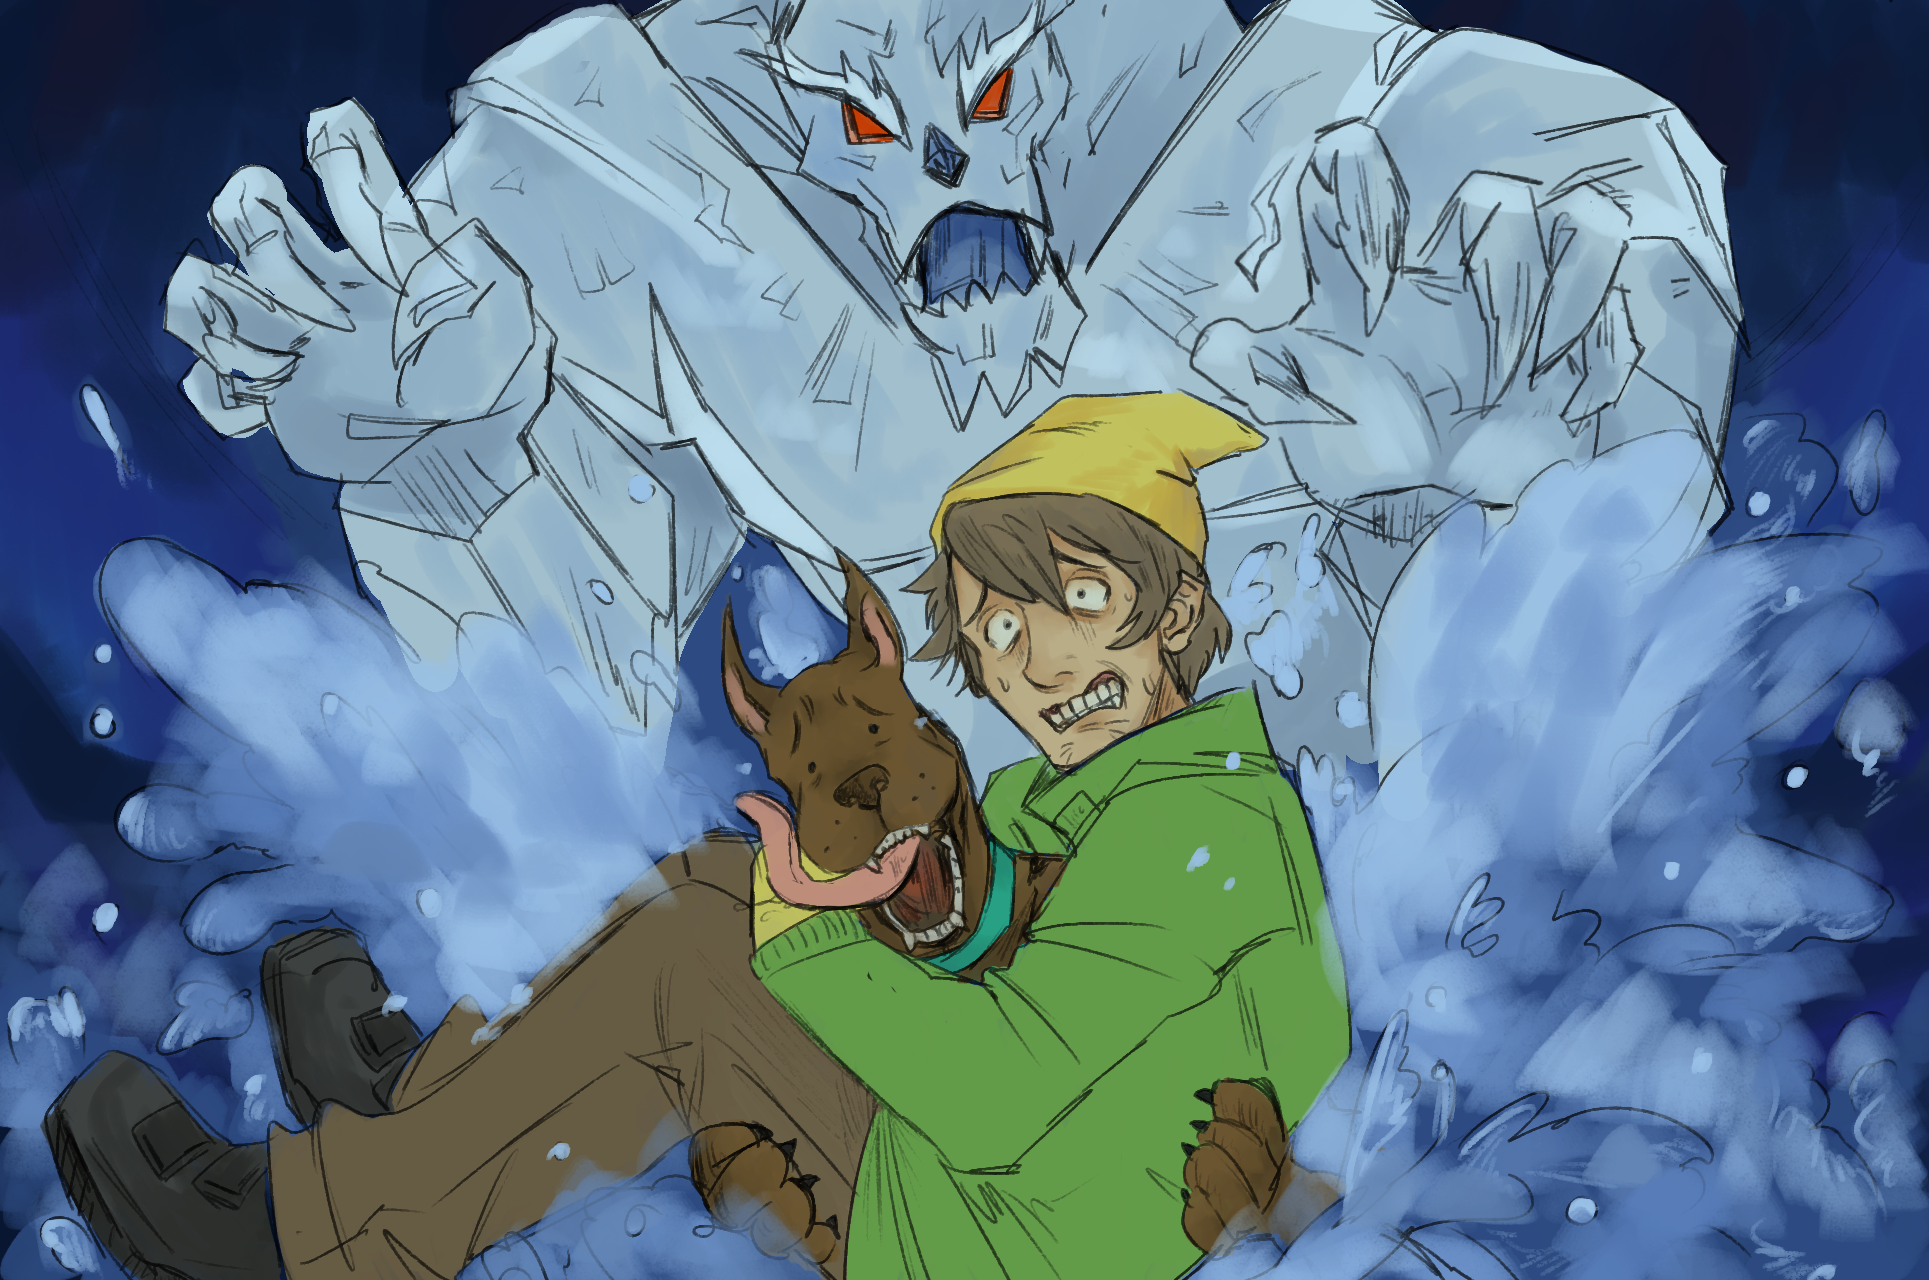   Scooby Dudes  - Episode 51: "There's No Creature Like Snow Creature" - Title Card by Odango 